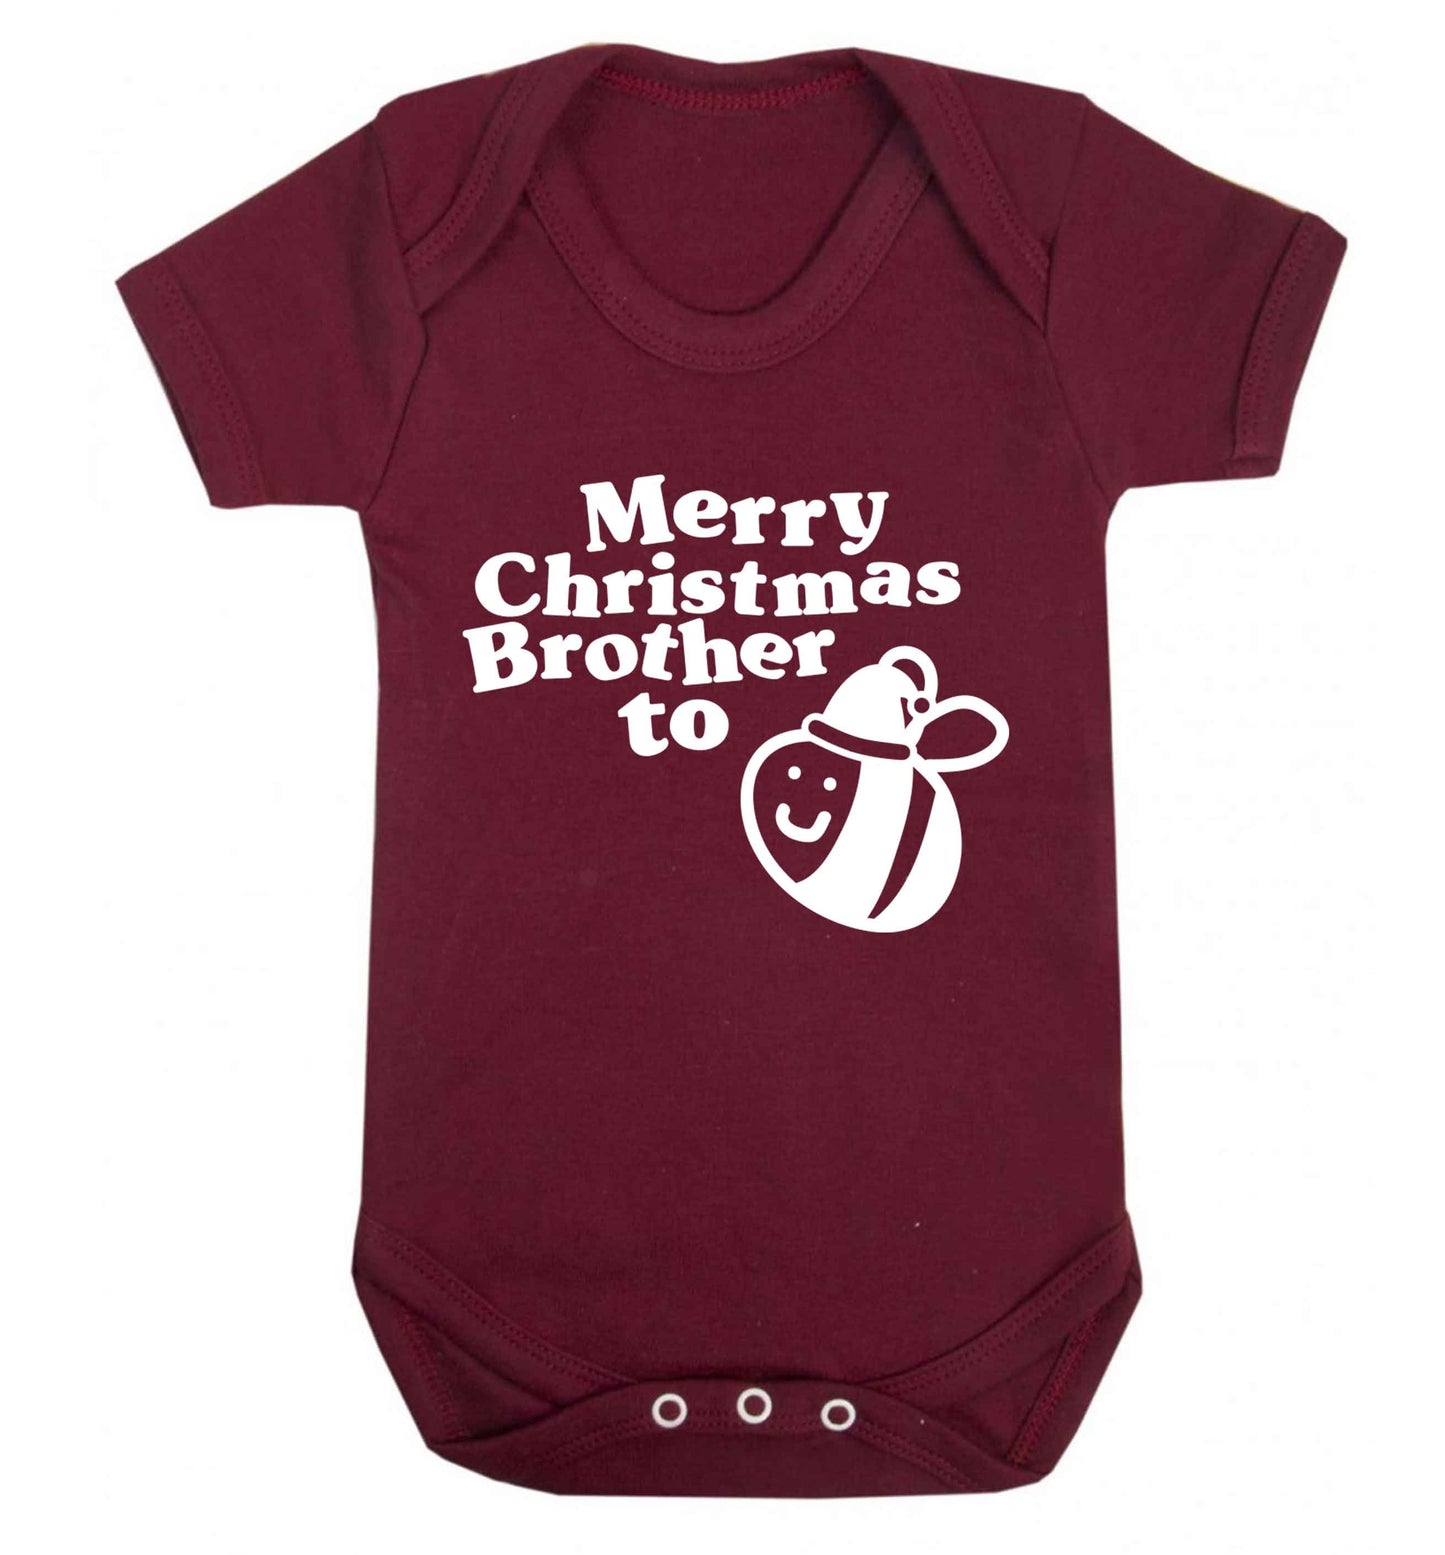 Merry Christmas brother to be Baby Vest maroon 18-24 months